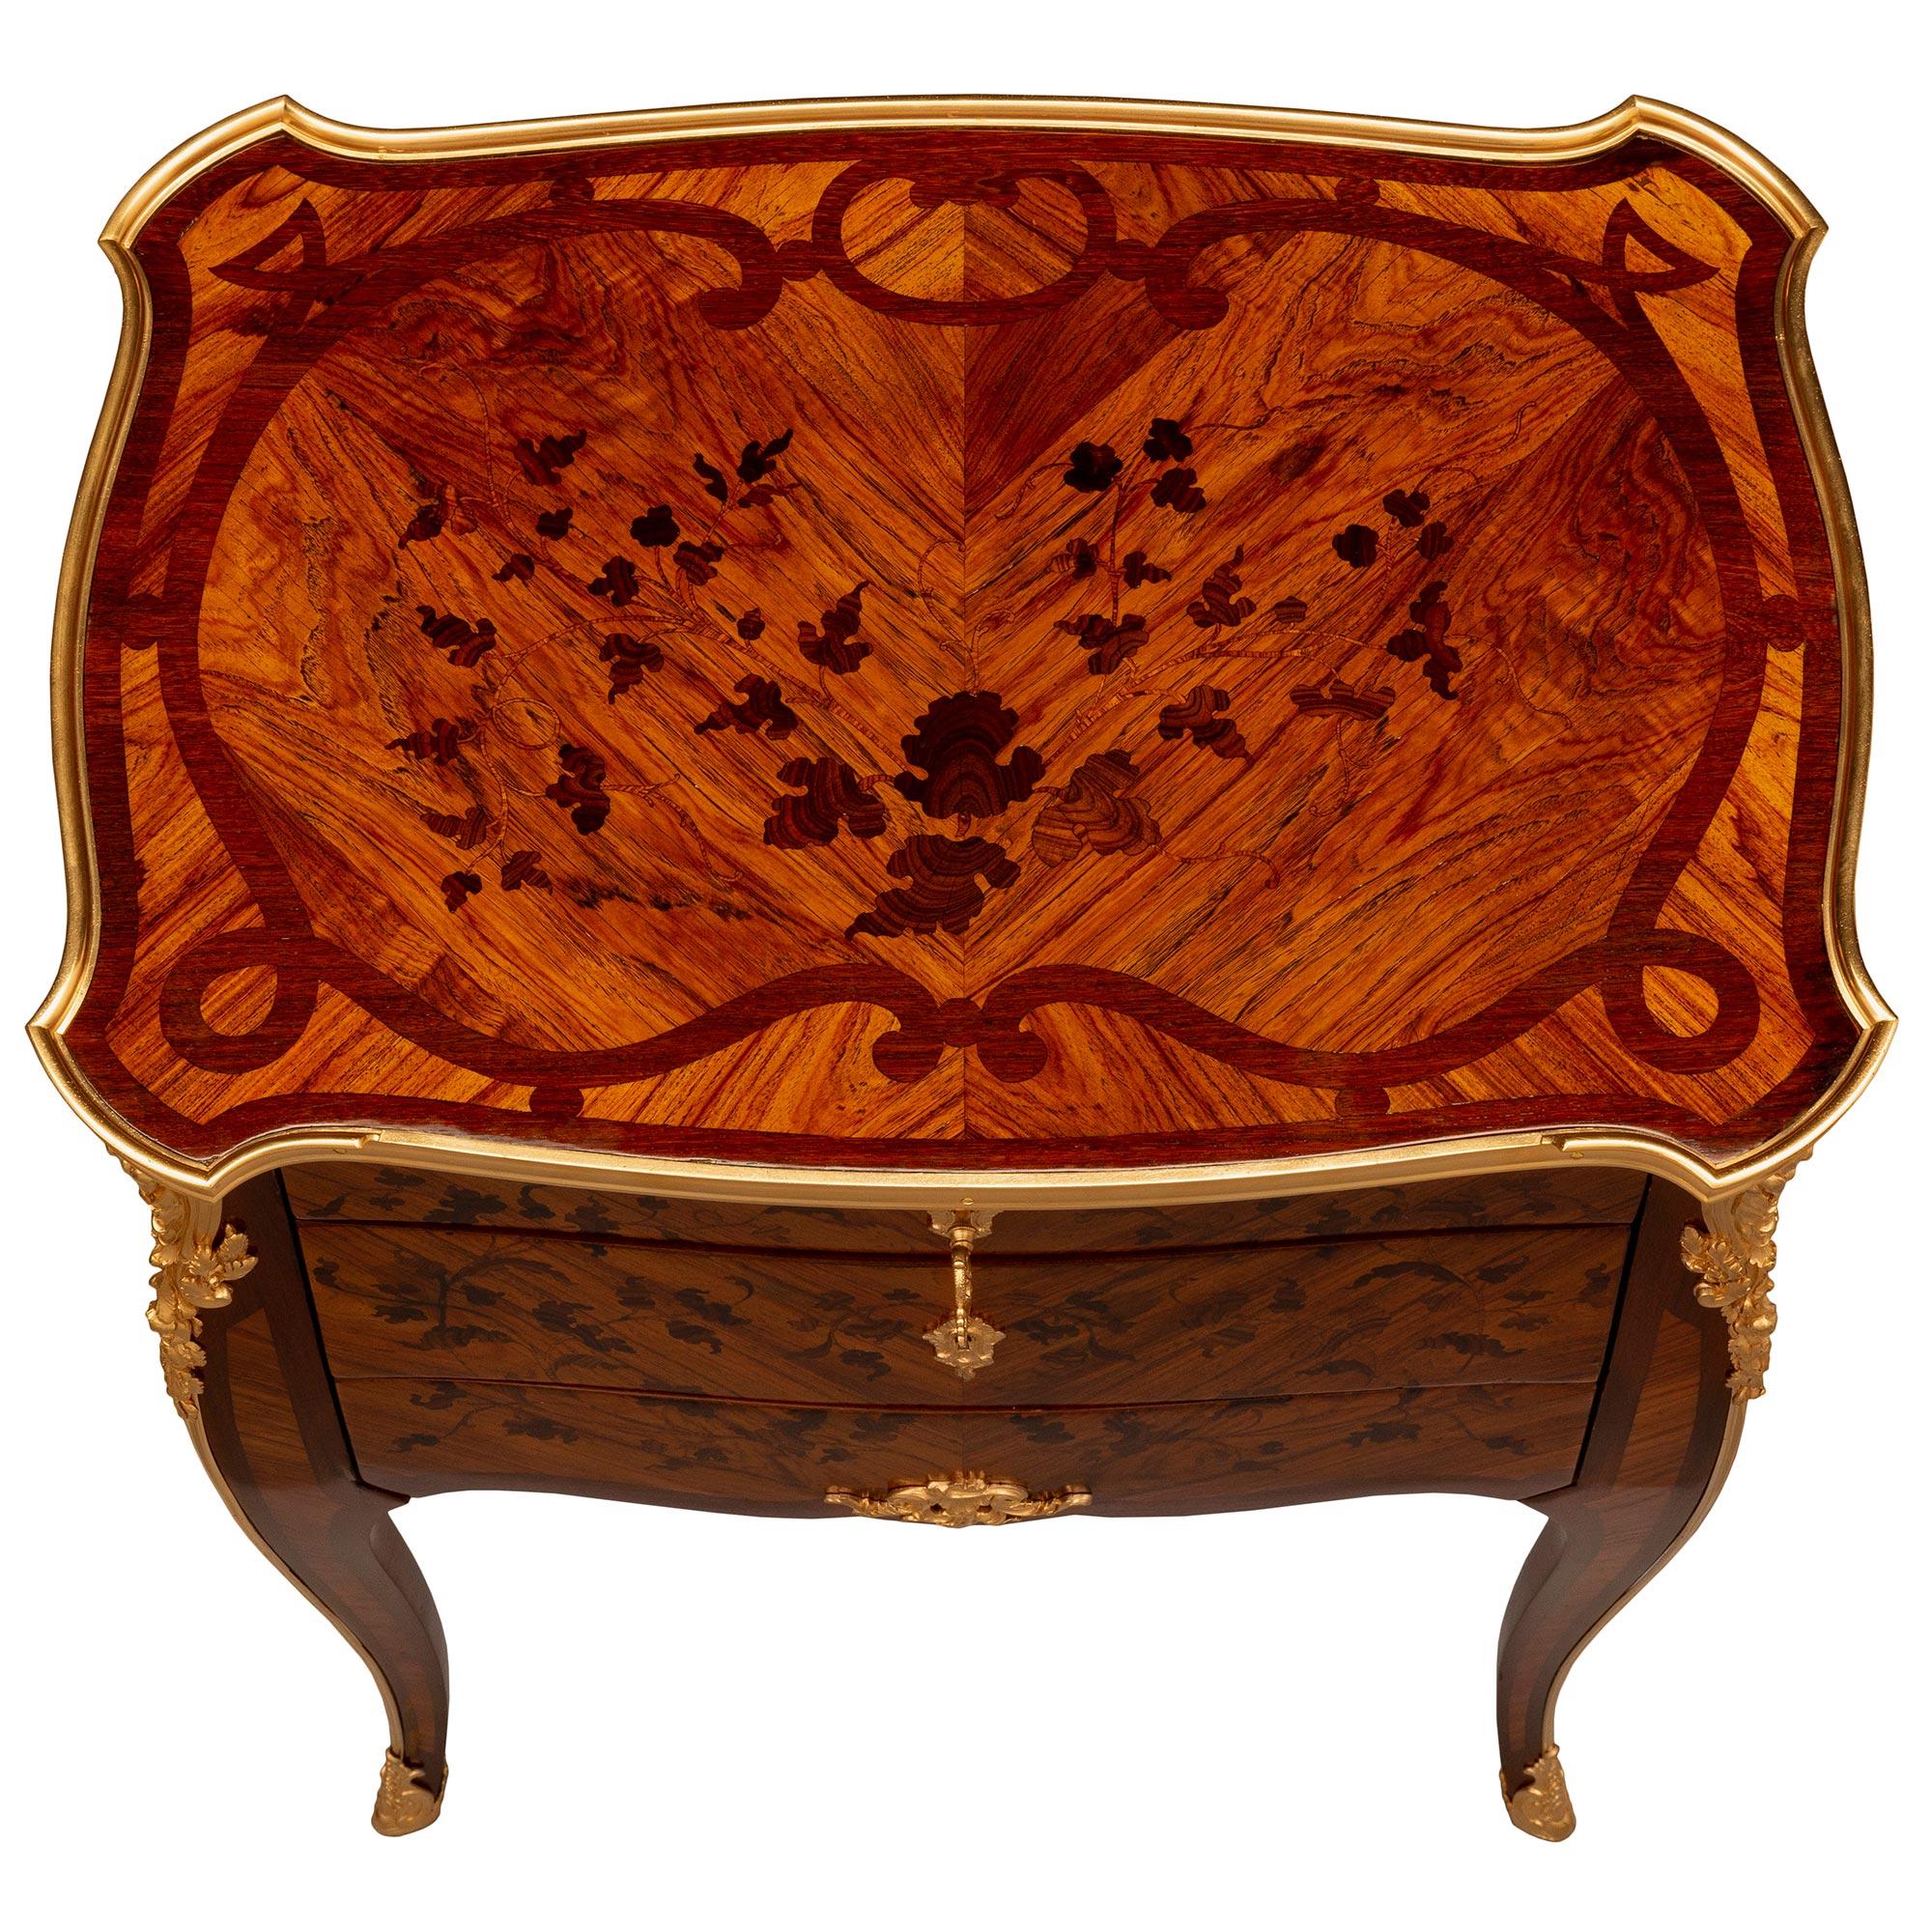 A stunning French 19th century Louis XV st. Kingwood, exotic wood, and ormolu side table signed by Durand. The three-drawer table is raised by elegant cabriole legs with exceptional fitted foliate ormolu sabots and chutes leading up each leg to